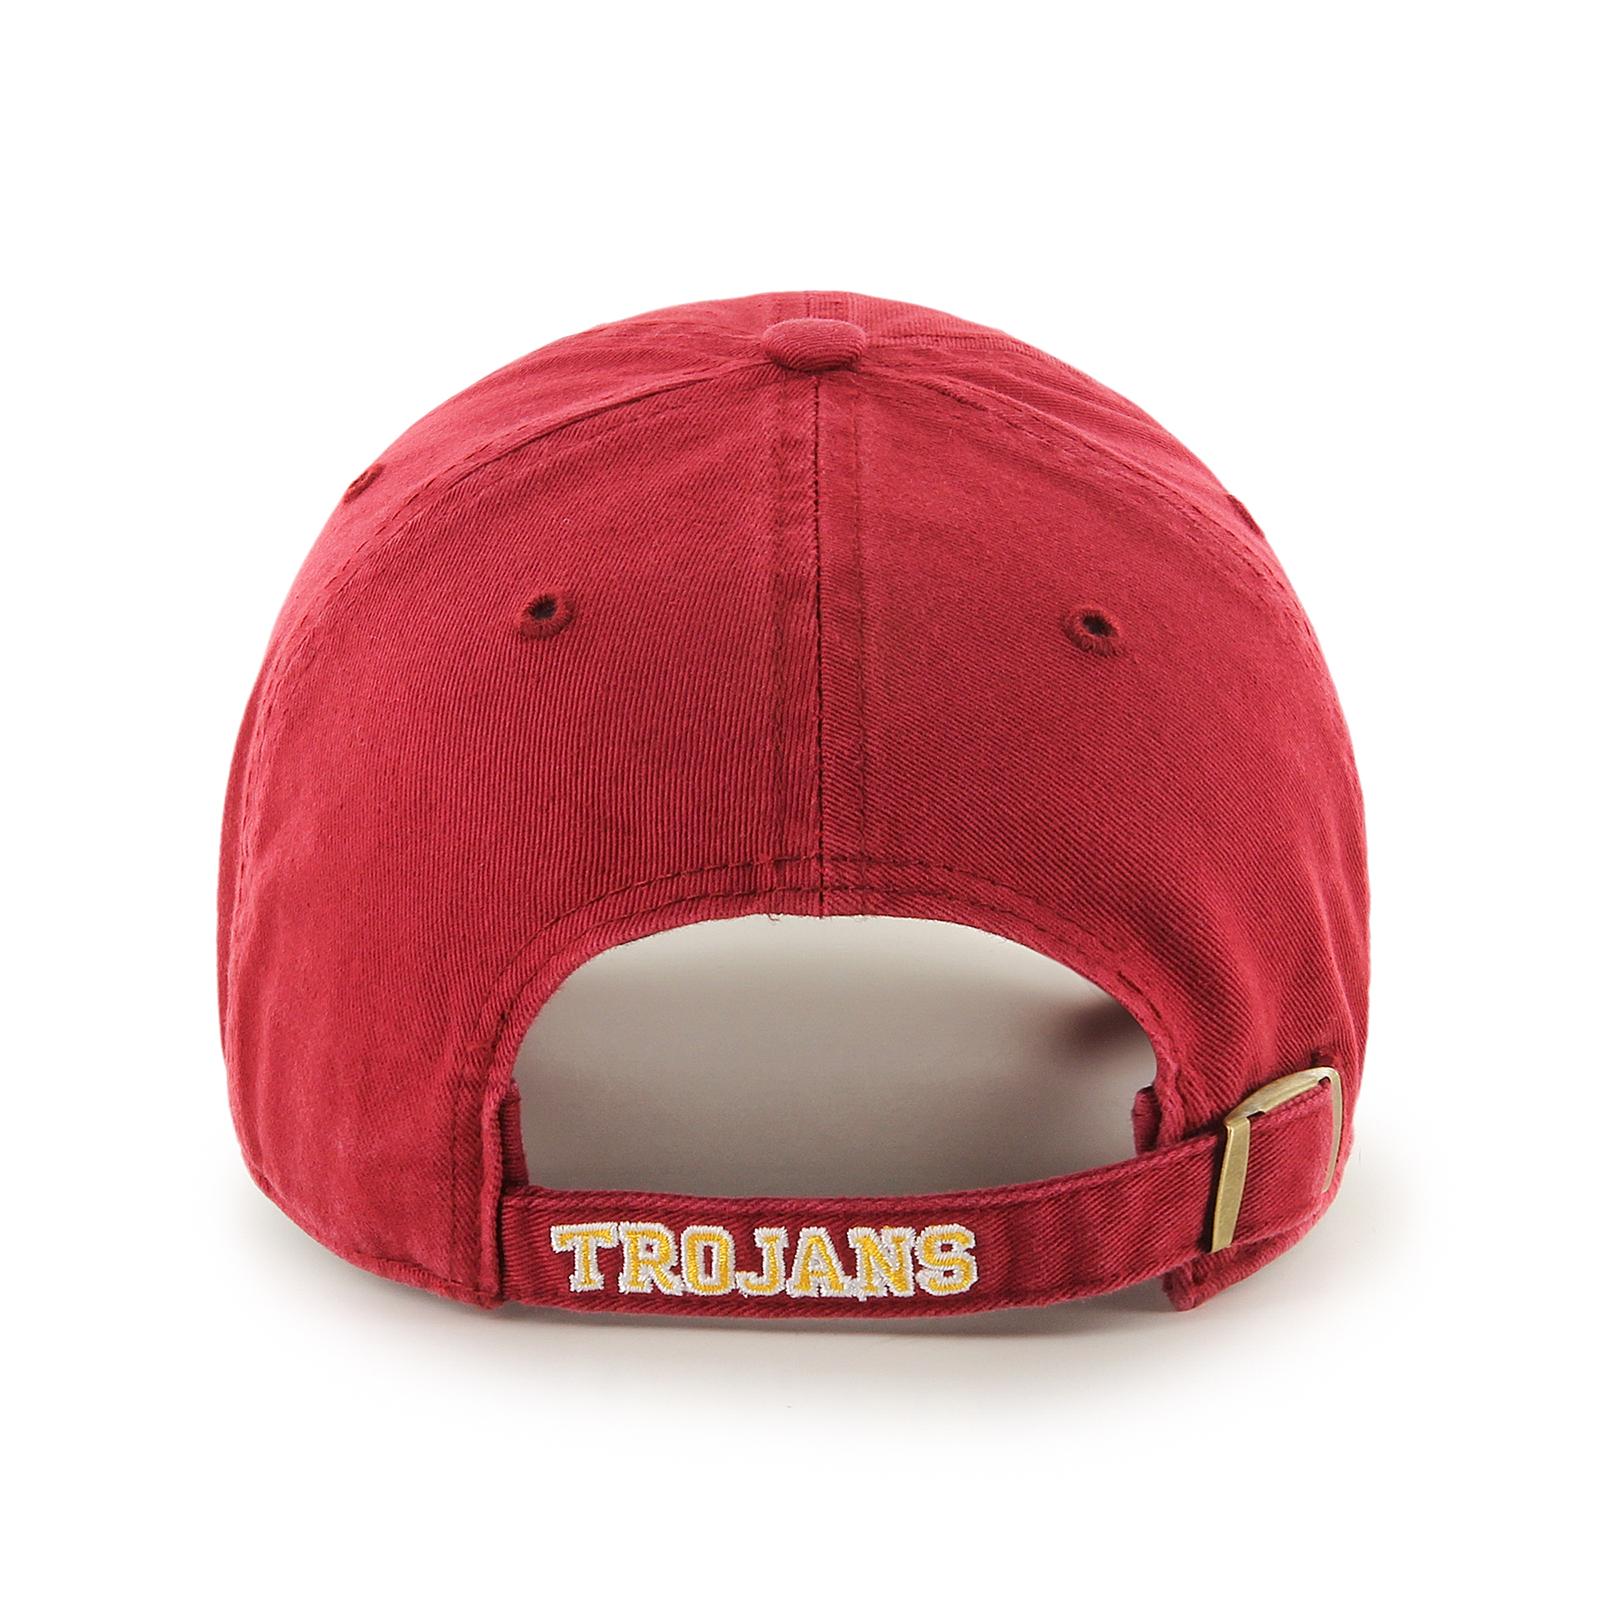 USC Arch Mens Clean Up Hat image61